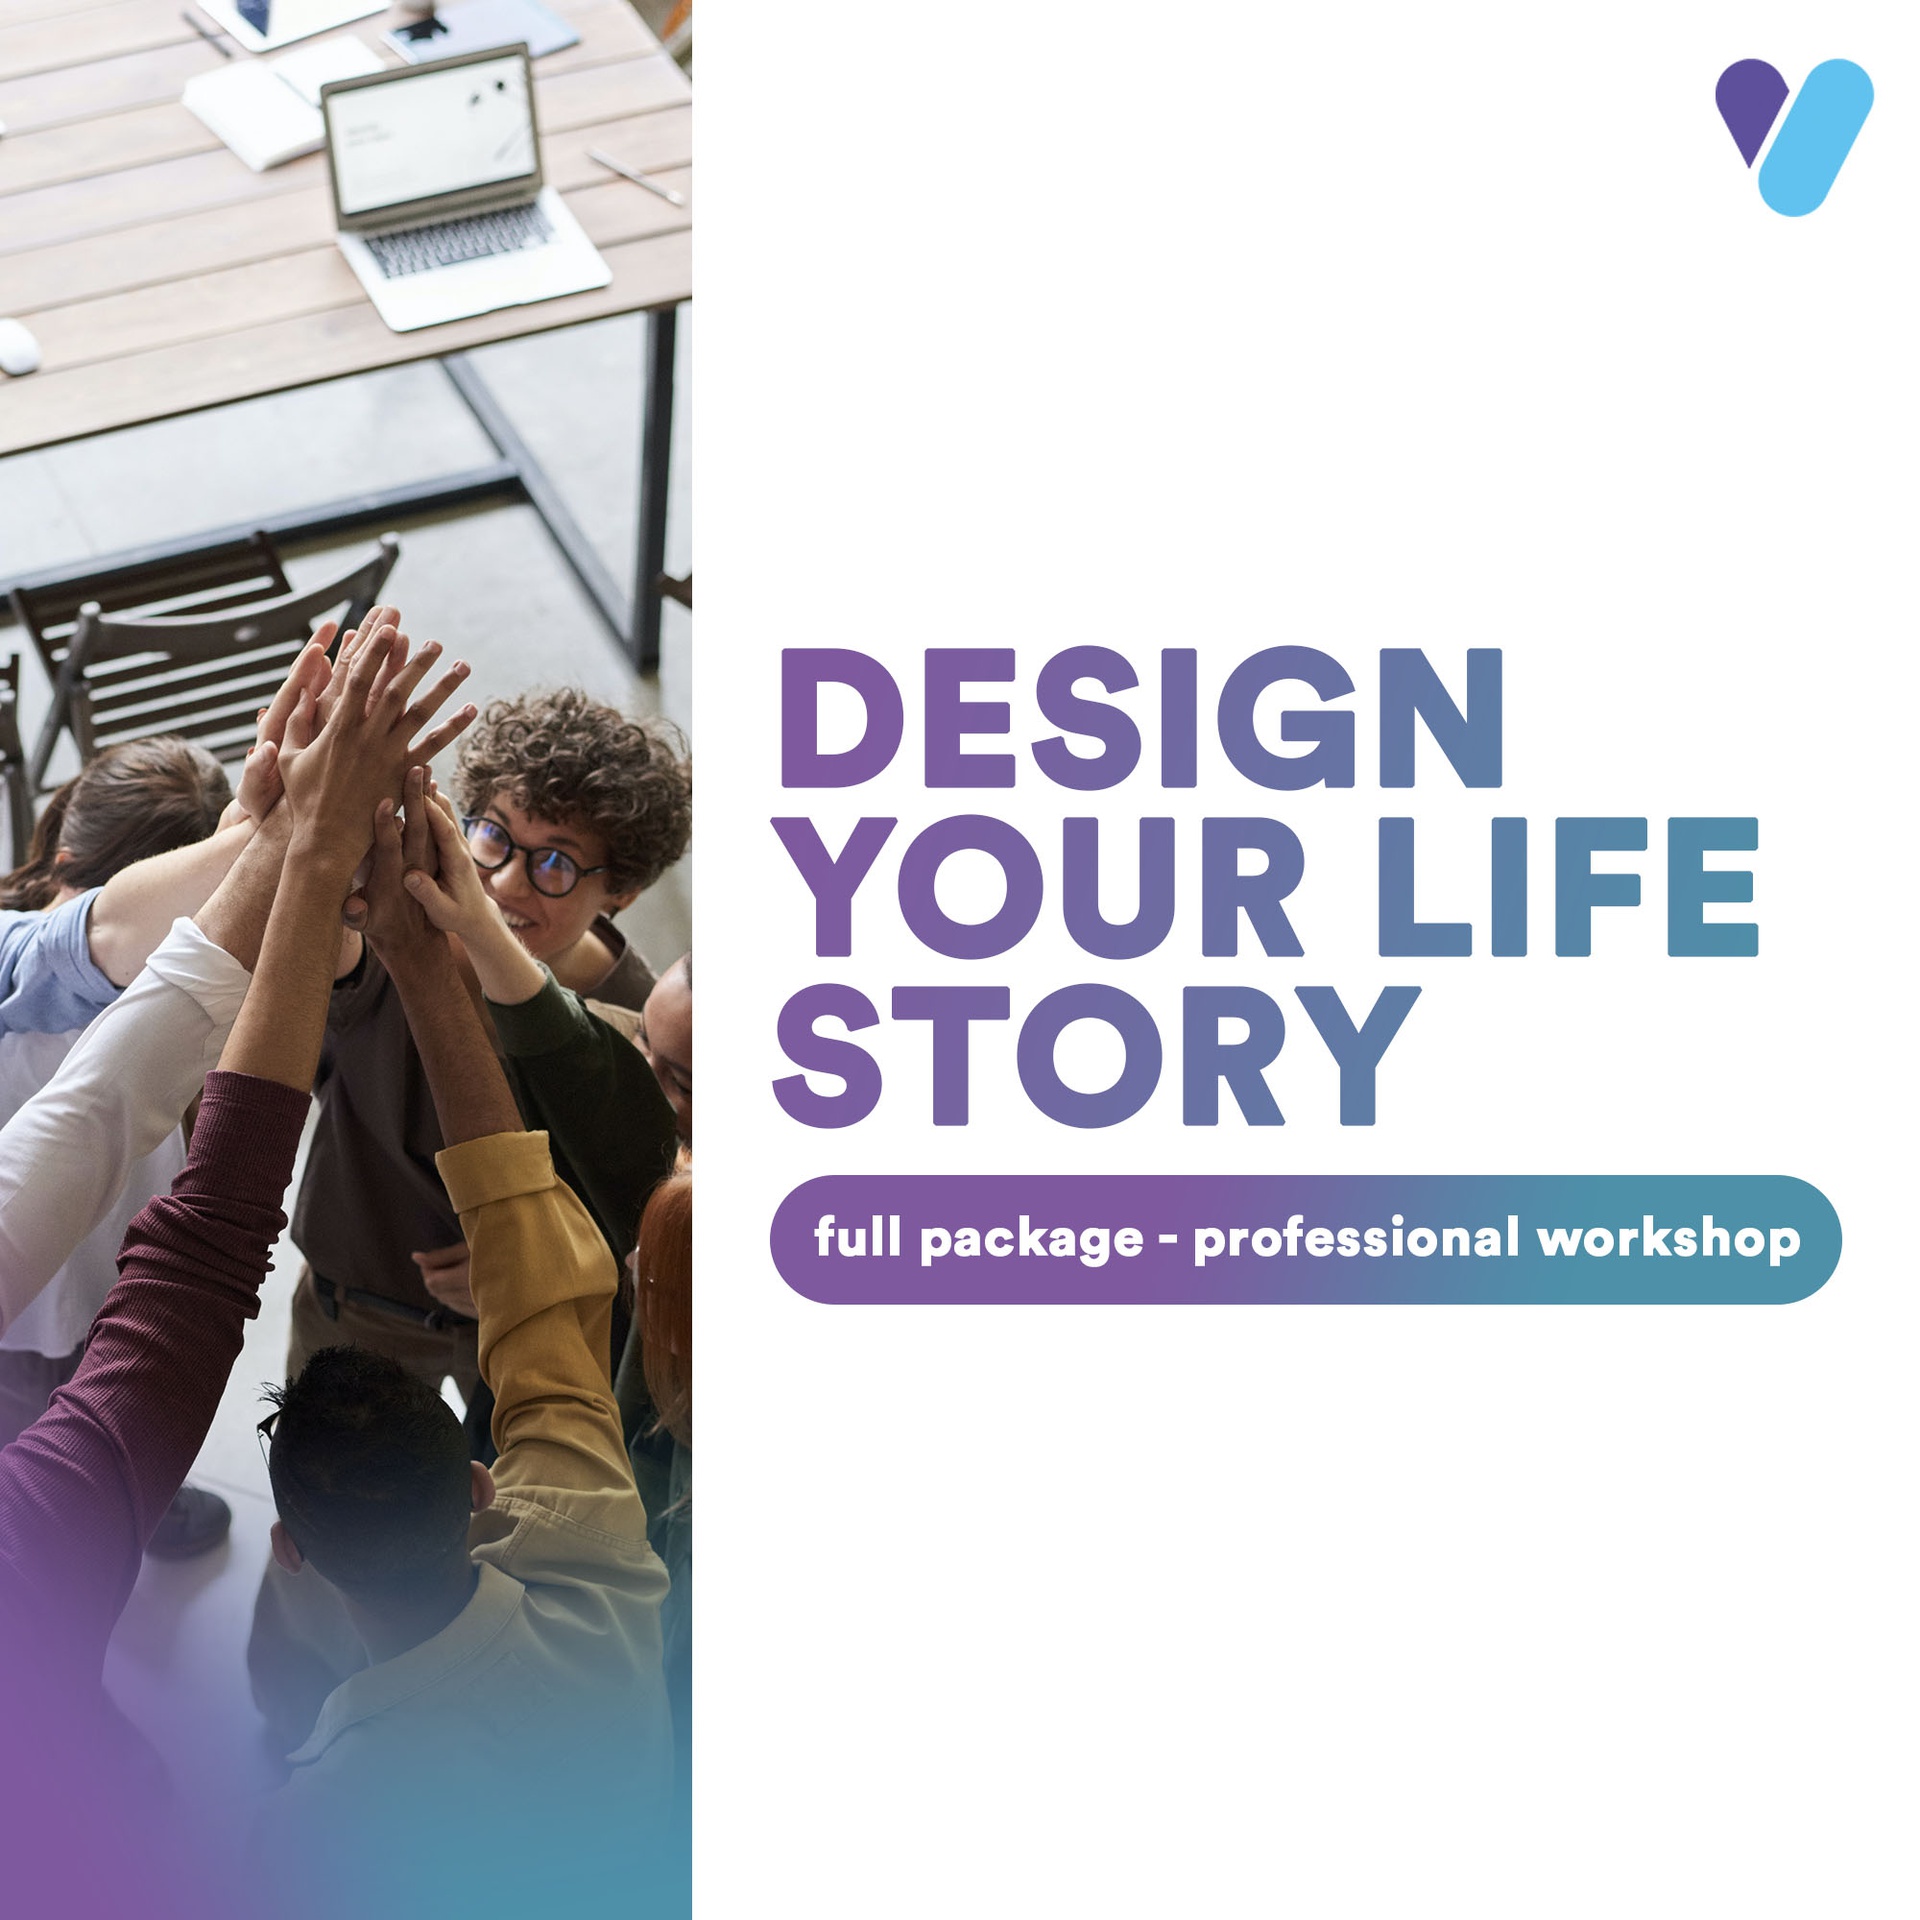 Design Your Life Story